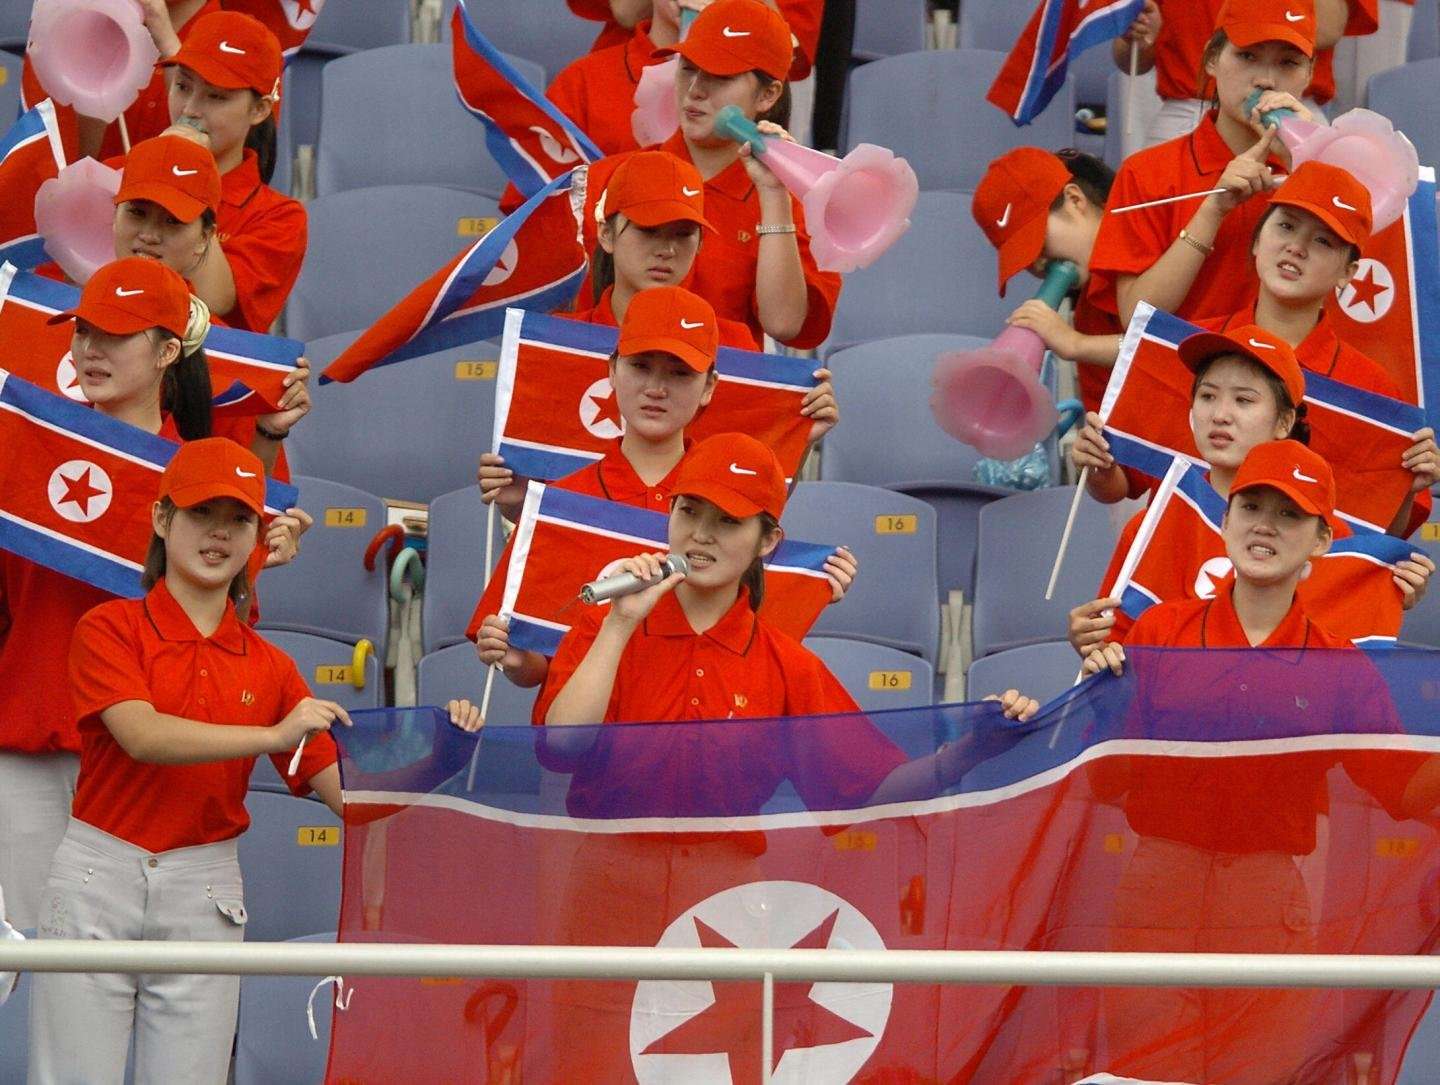 image for North Korean 'Army of Beauties' Cheer Squad and Athletes Will Attend the Olympics Games, Pyongyang Promises